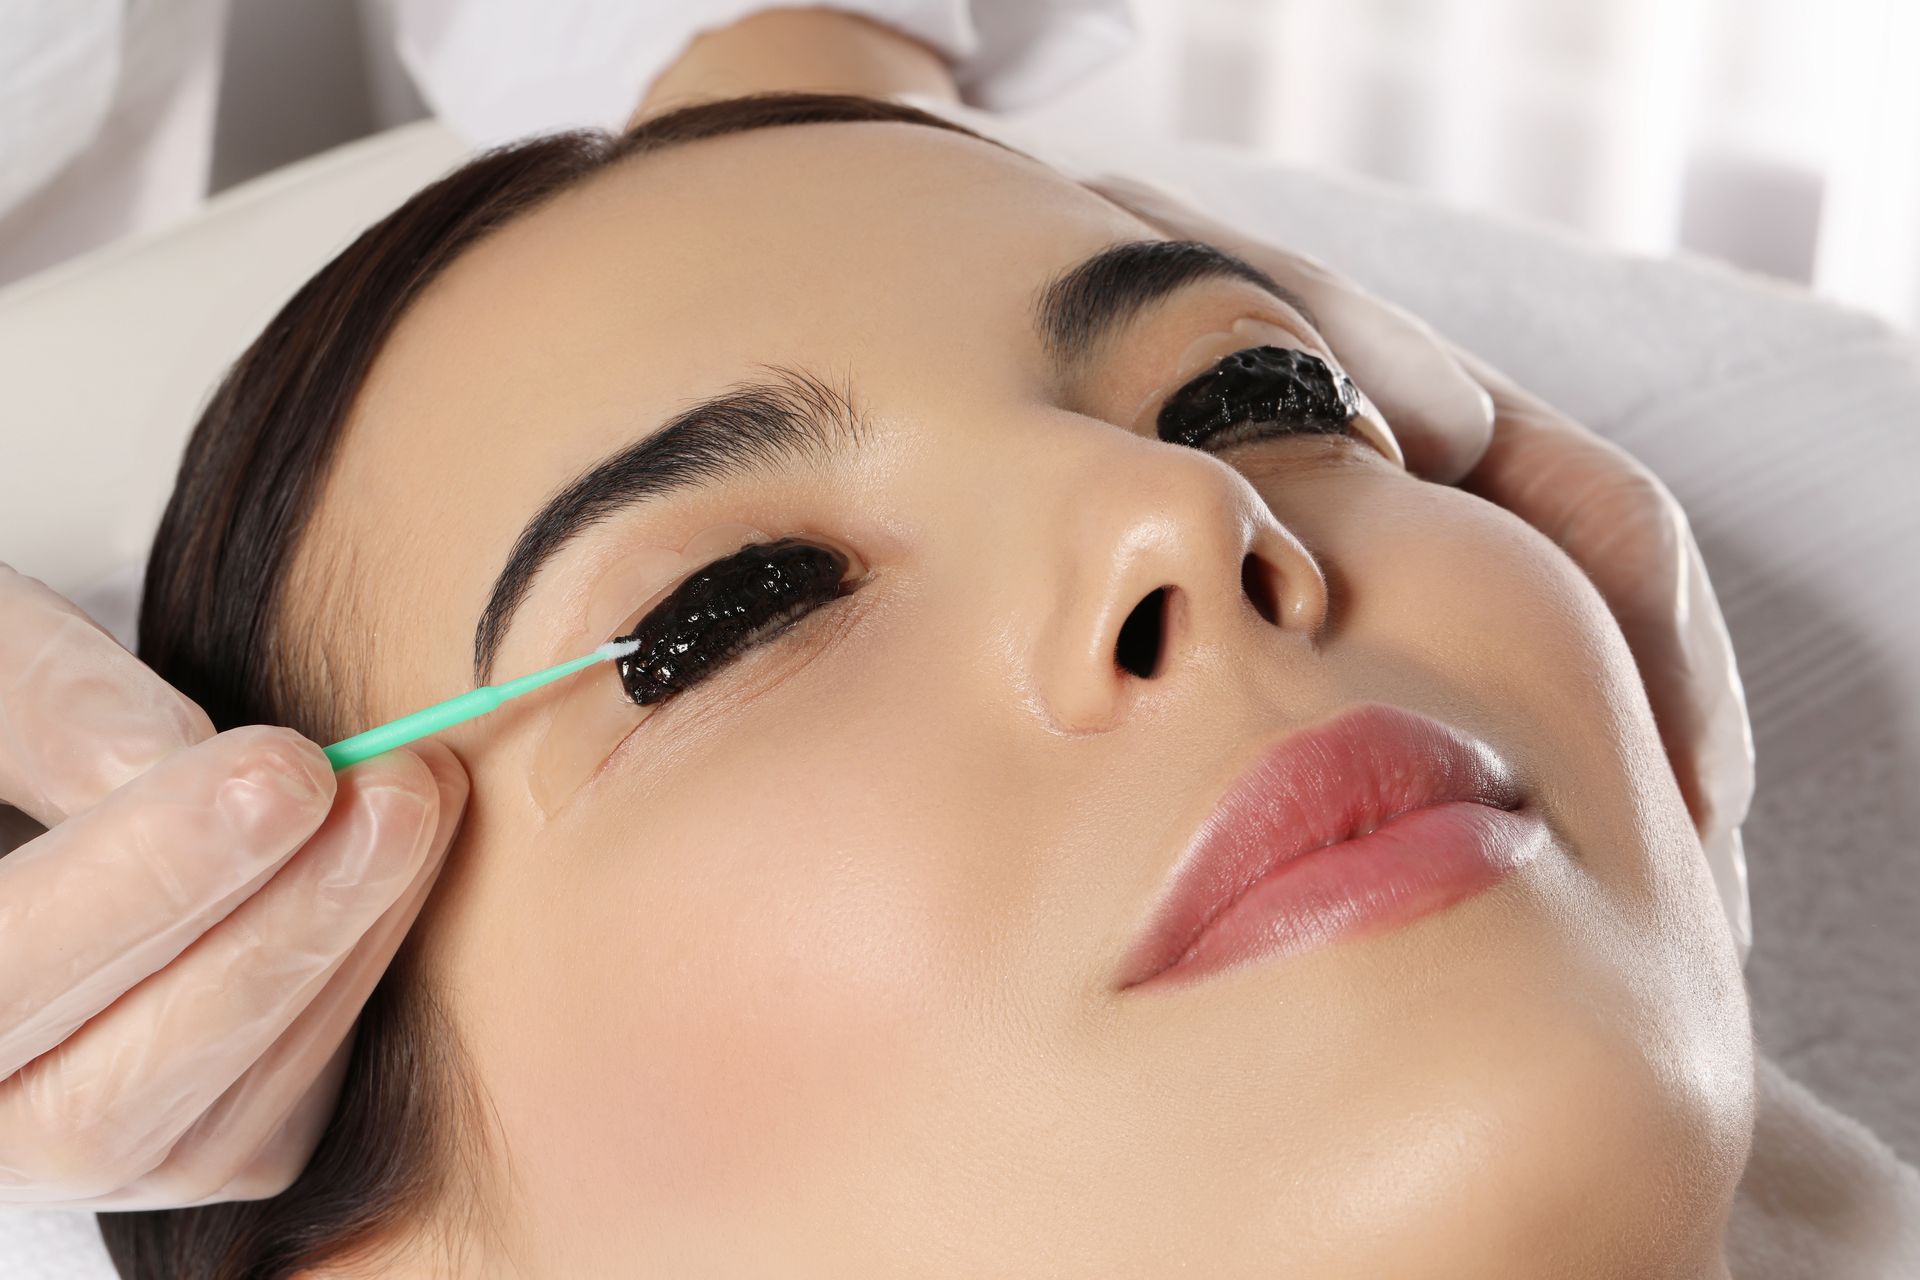 a woman is getting a treatment on her eyelashes